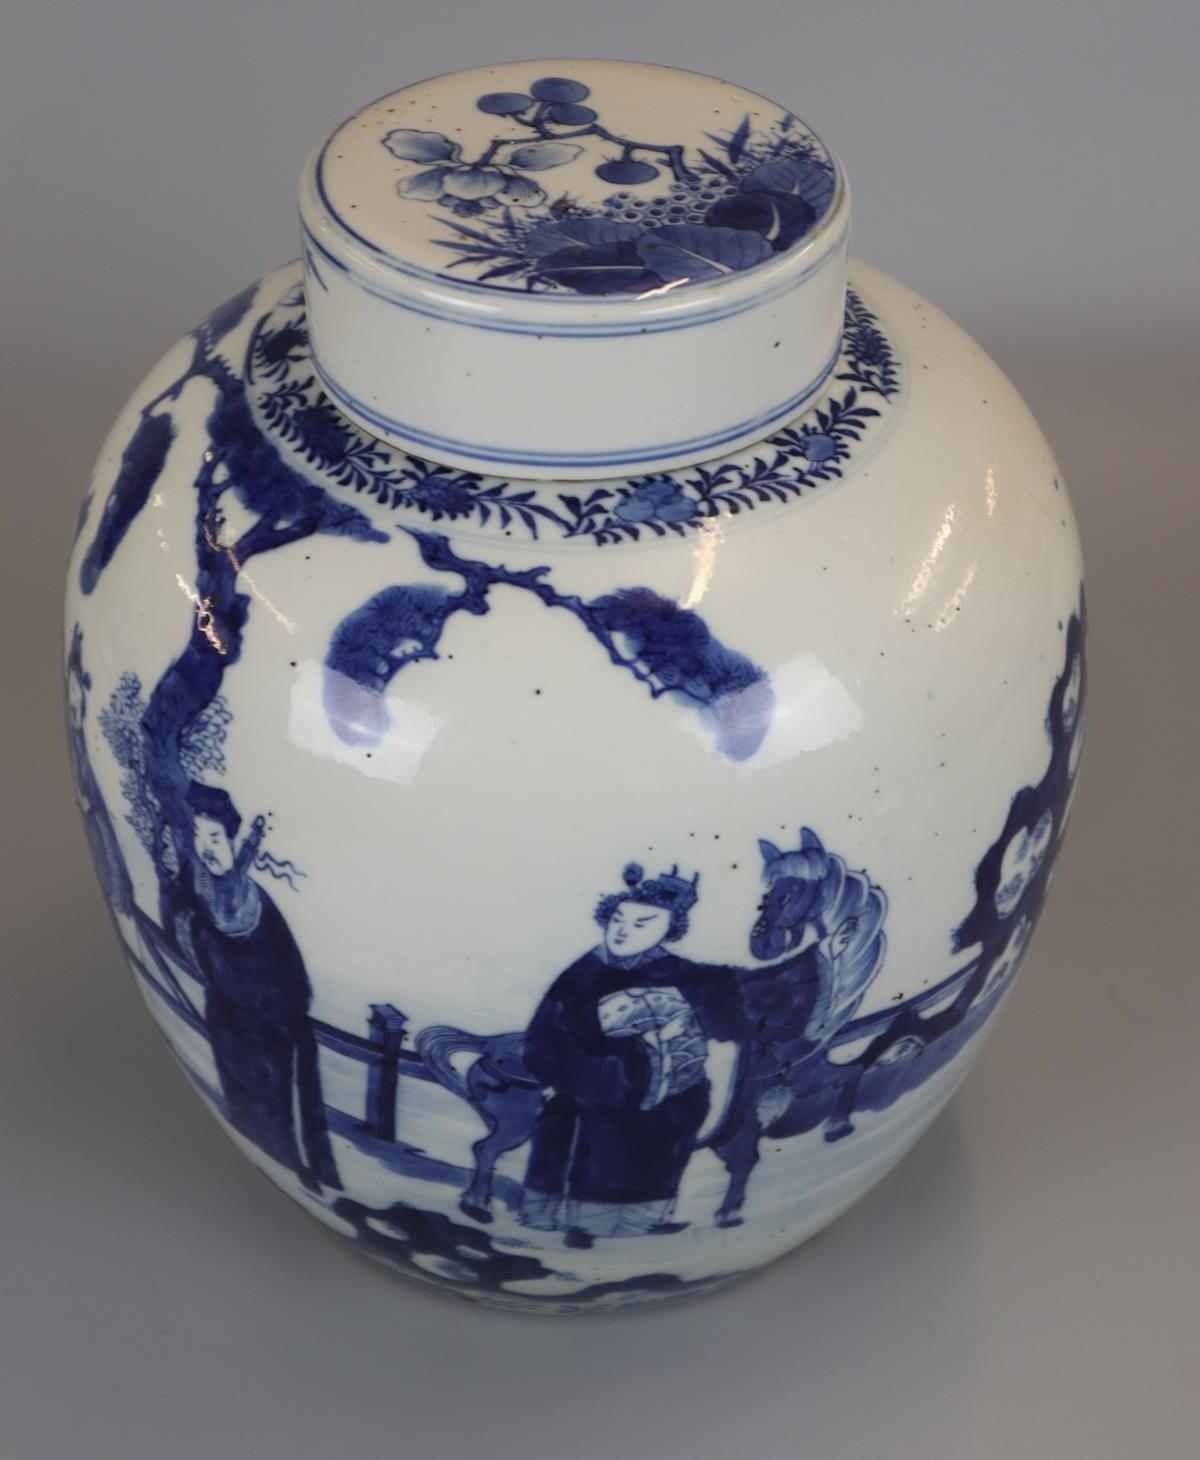 Late 18th / early 19thC blue & white ginger jar - Approx H: 28cm